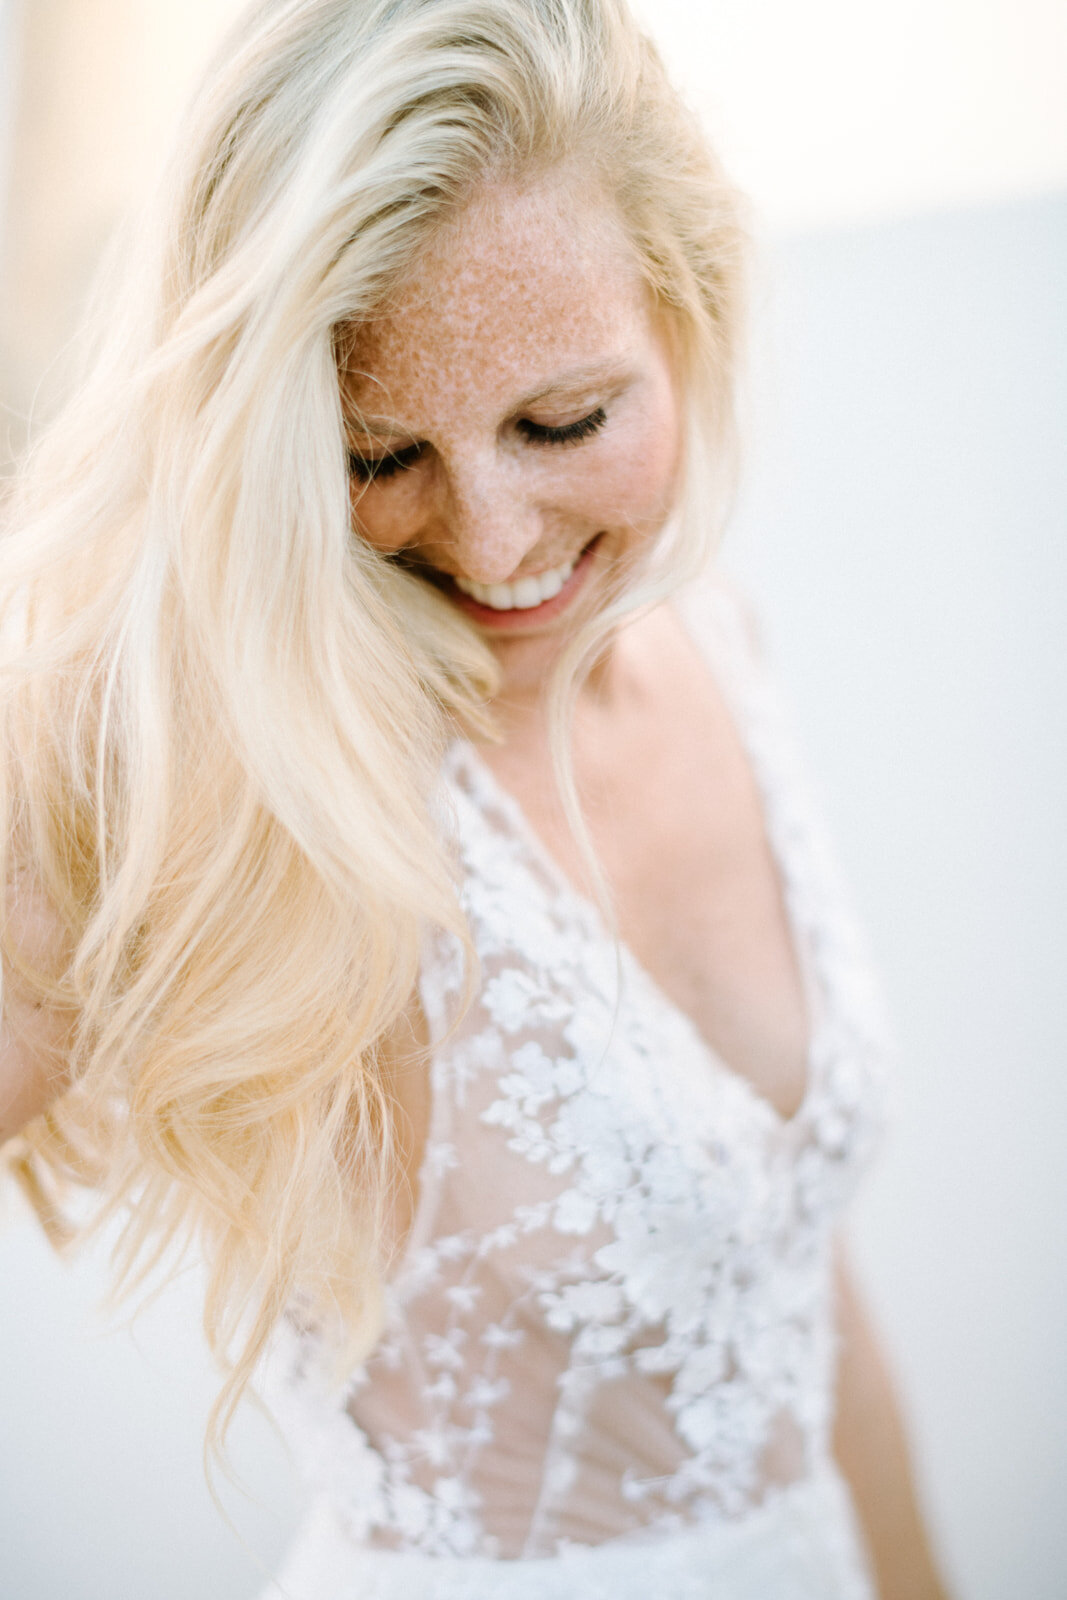 bride with freckles on wedding day in mallorca